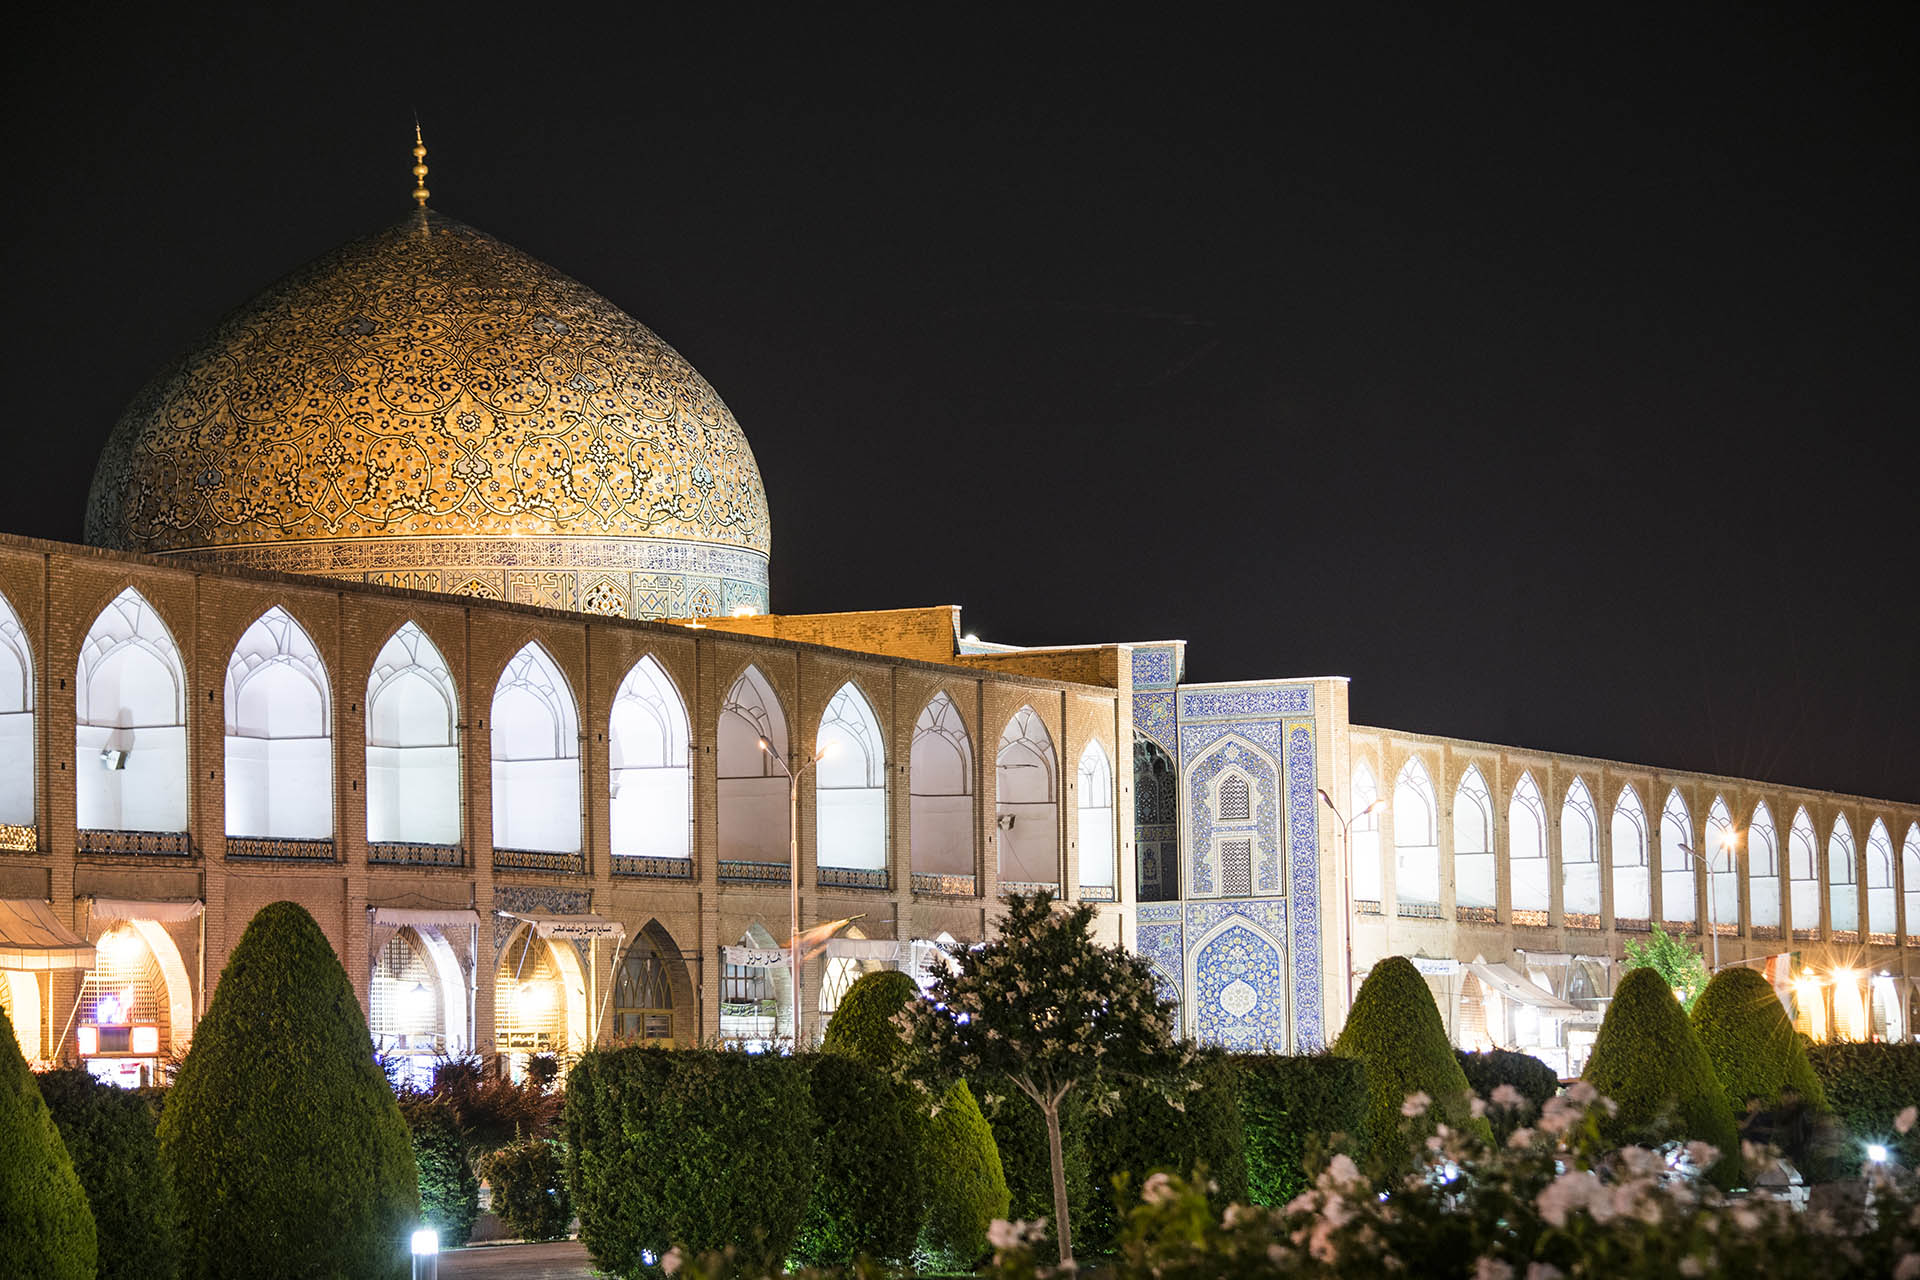 The Sheikh Lotfollah Mosque of Isfahan